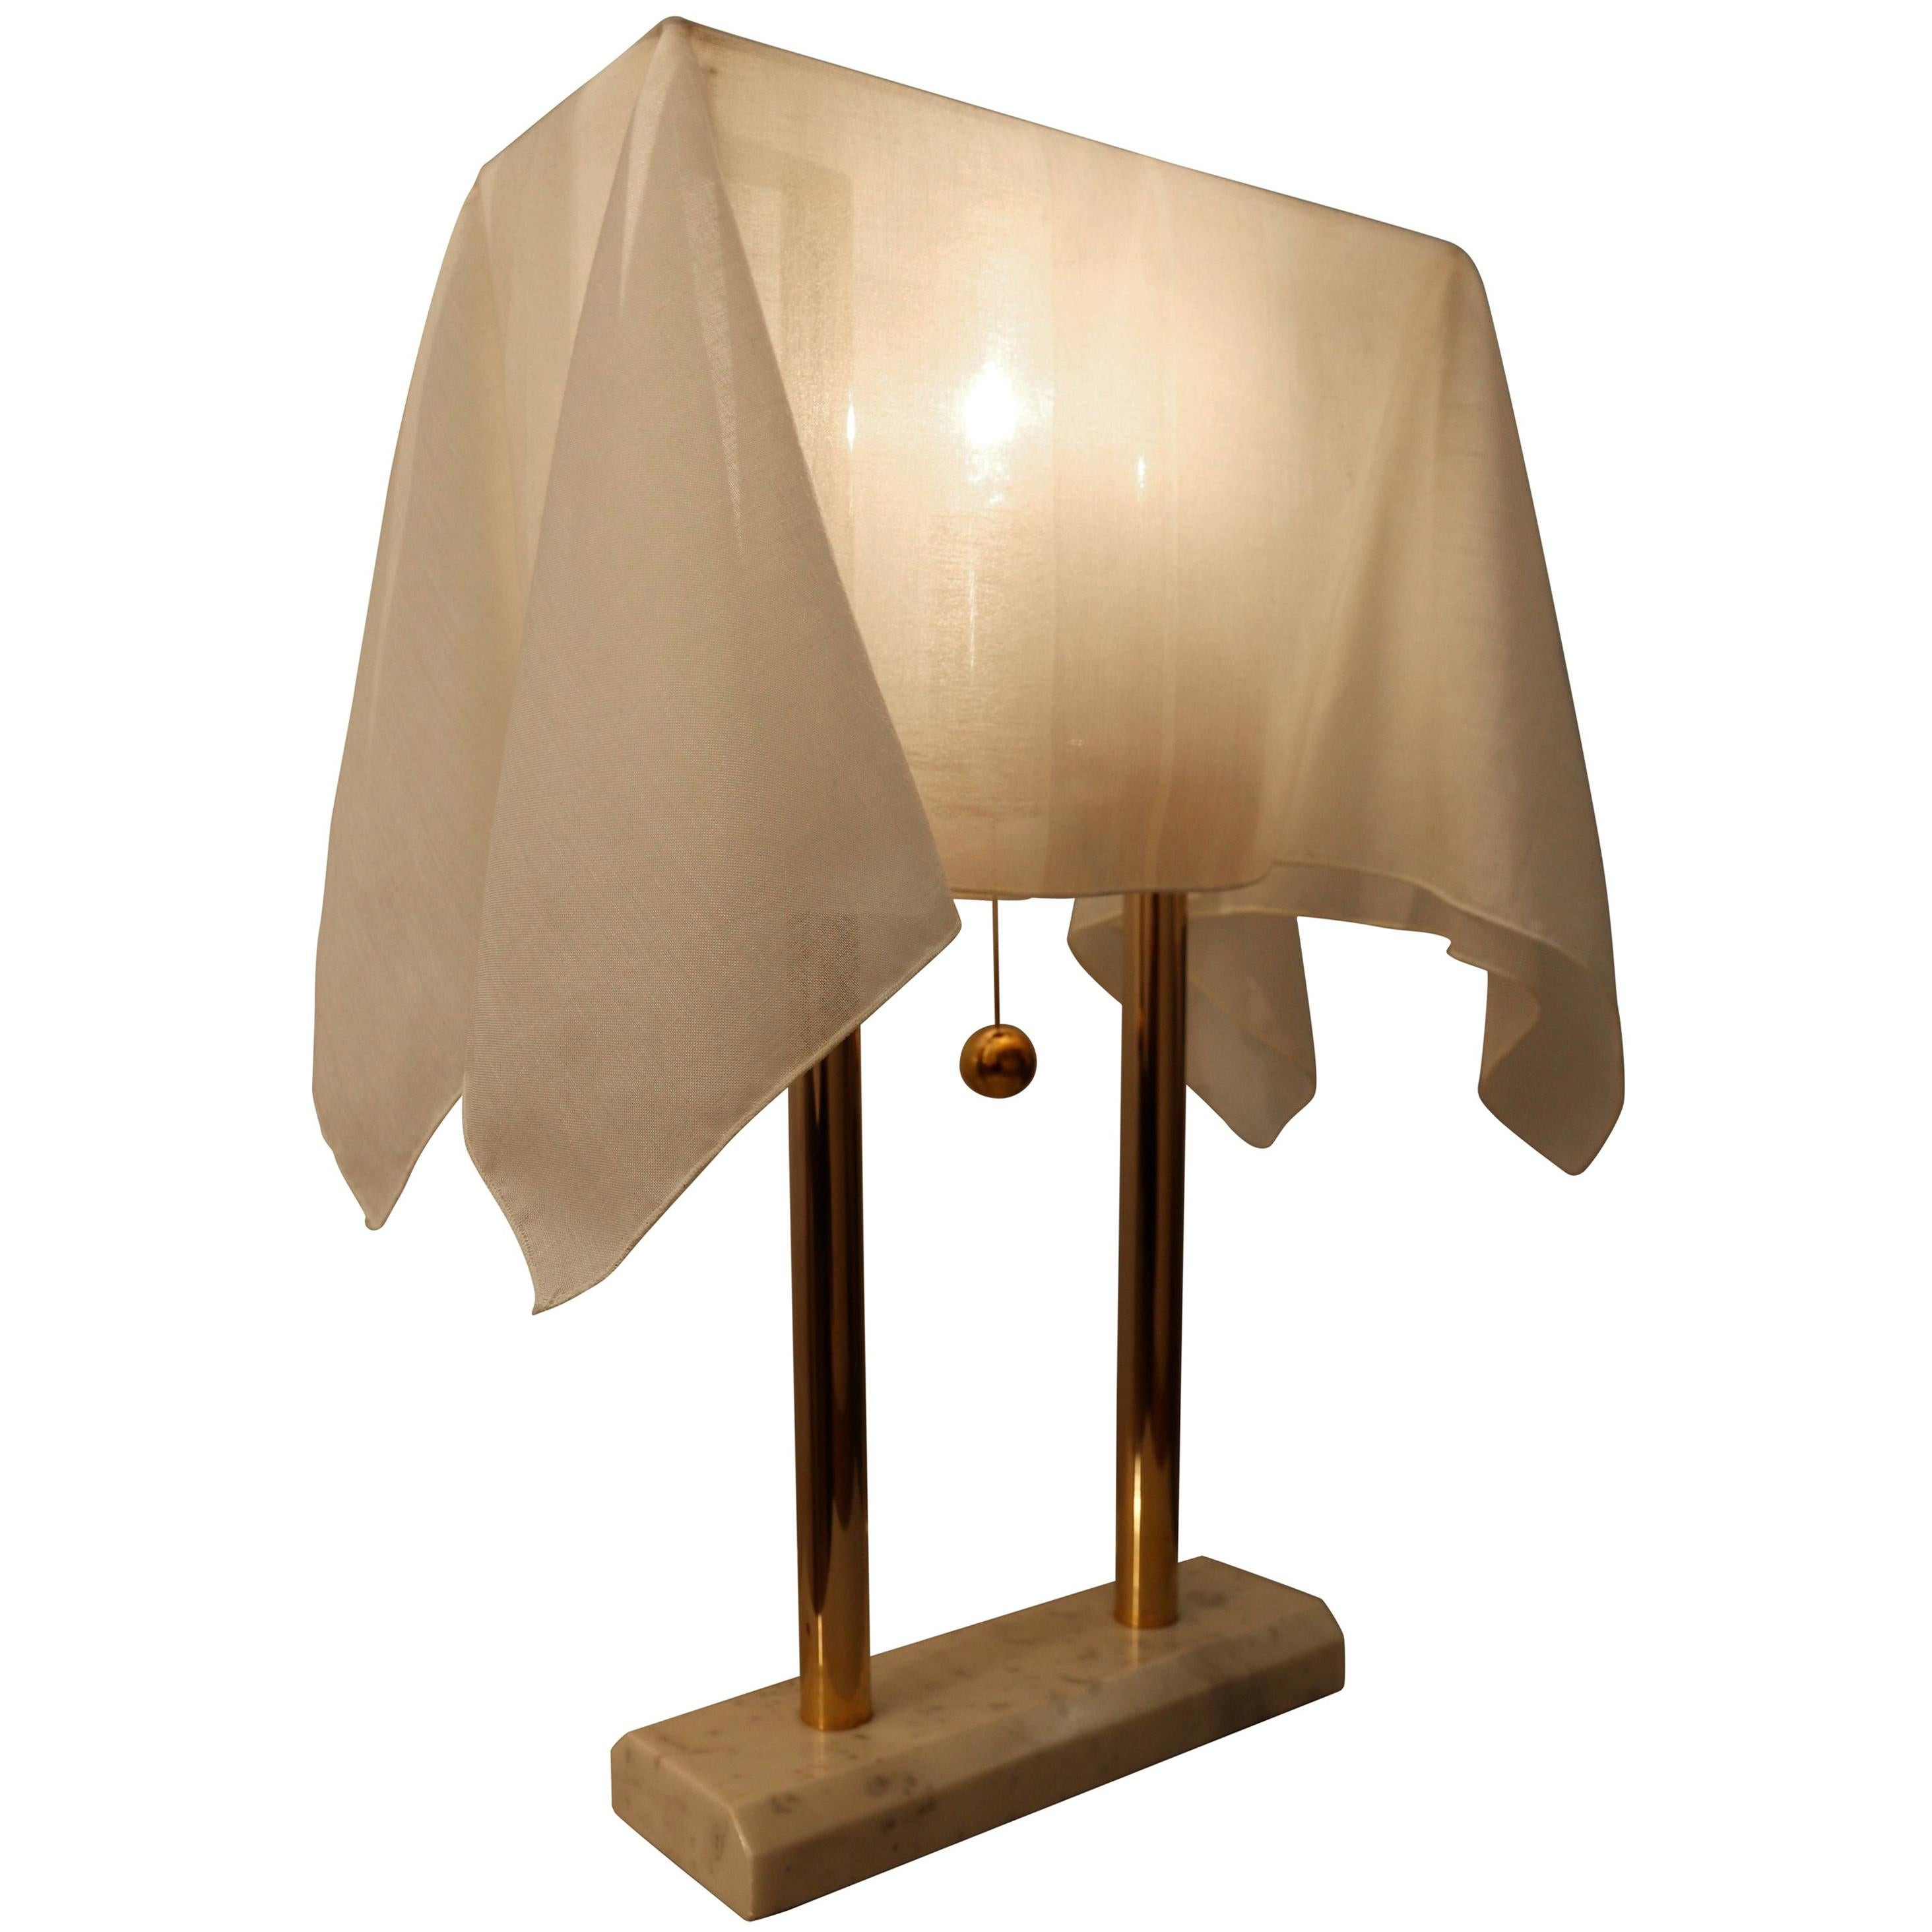 Beautiful and rare table or desk lamp by Japanese designer Kazuhide Takahama, manufactured by Sirrah, Italia, marked with the designer's tag under the base. The lamp features a Carrara marble base with a 23-carat gold-plated metal support, over